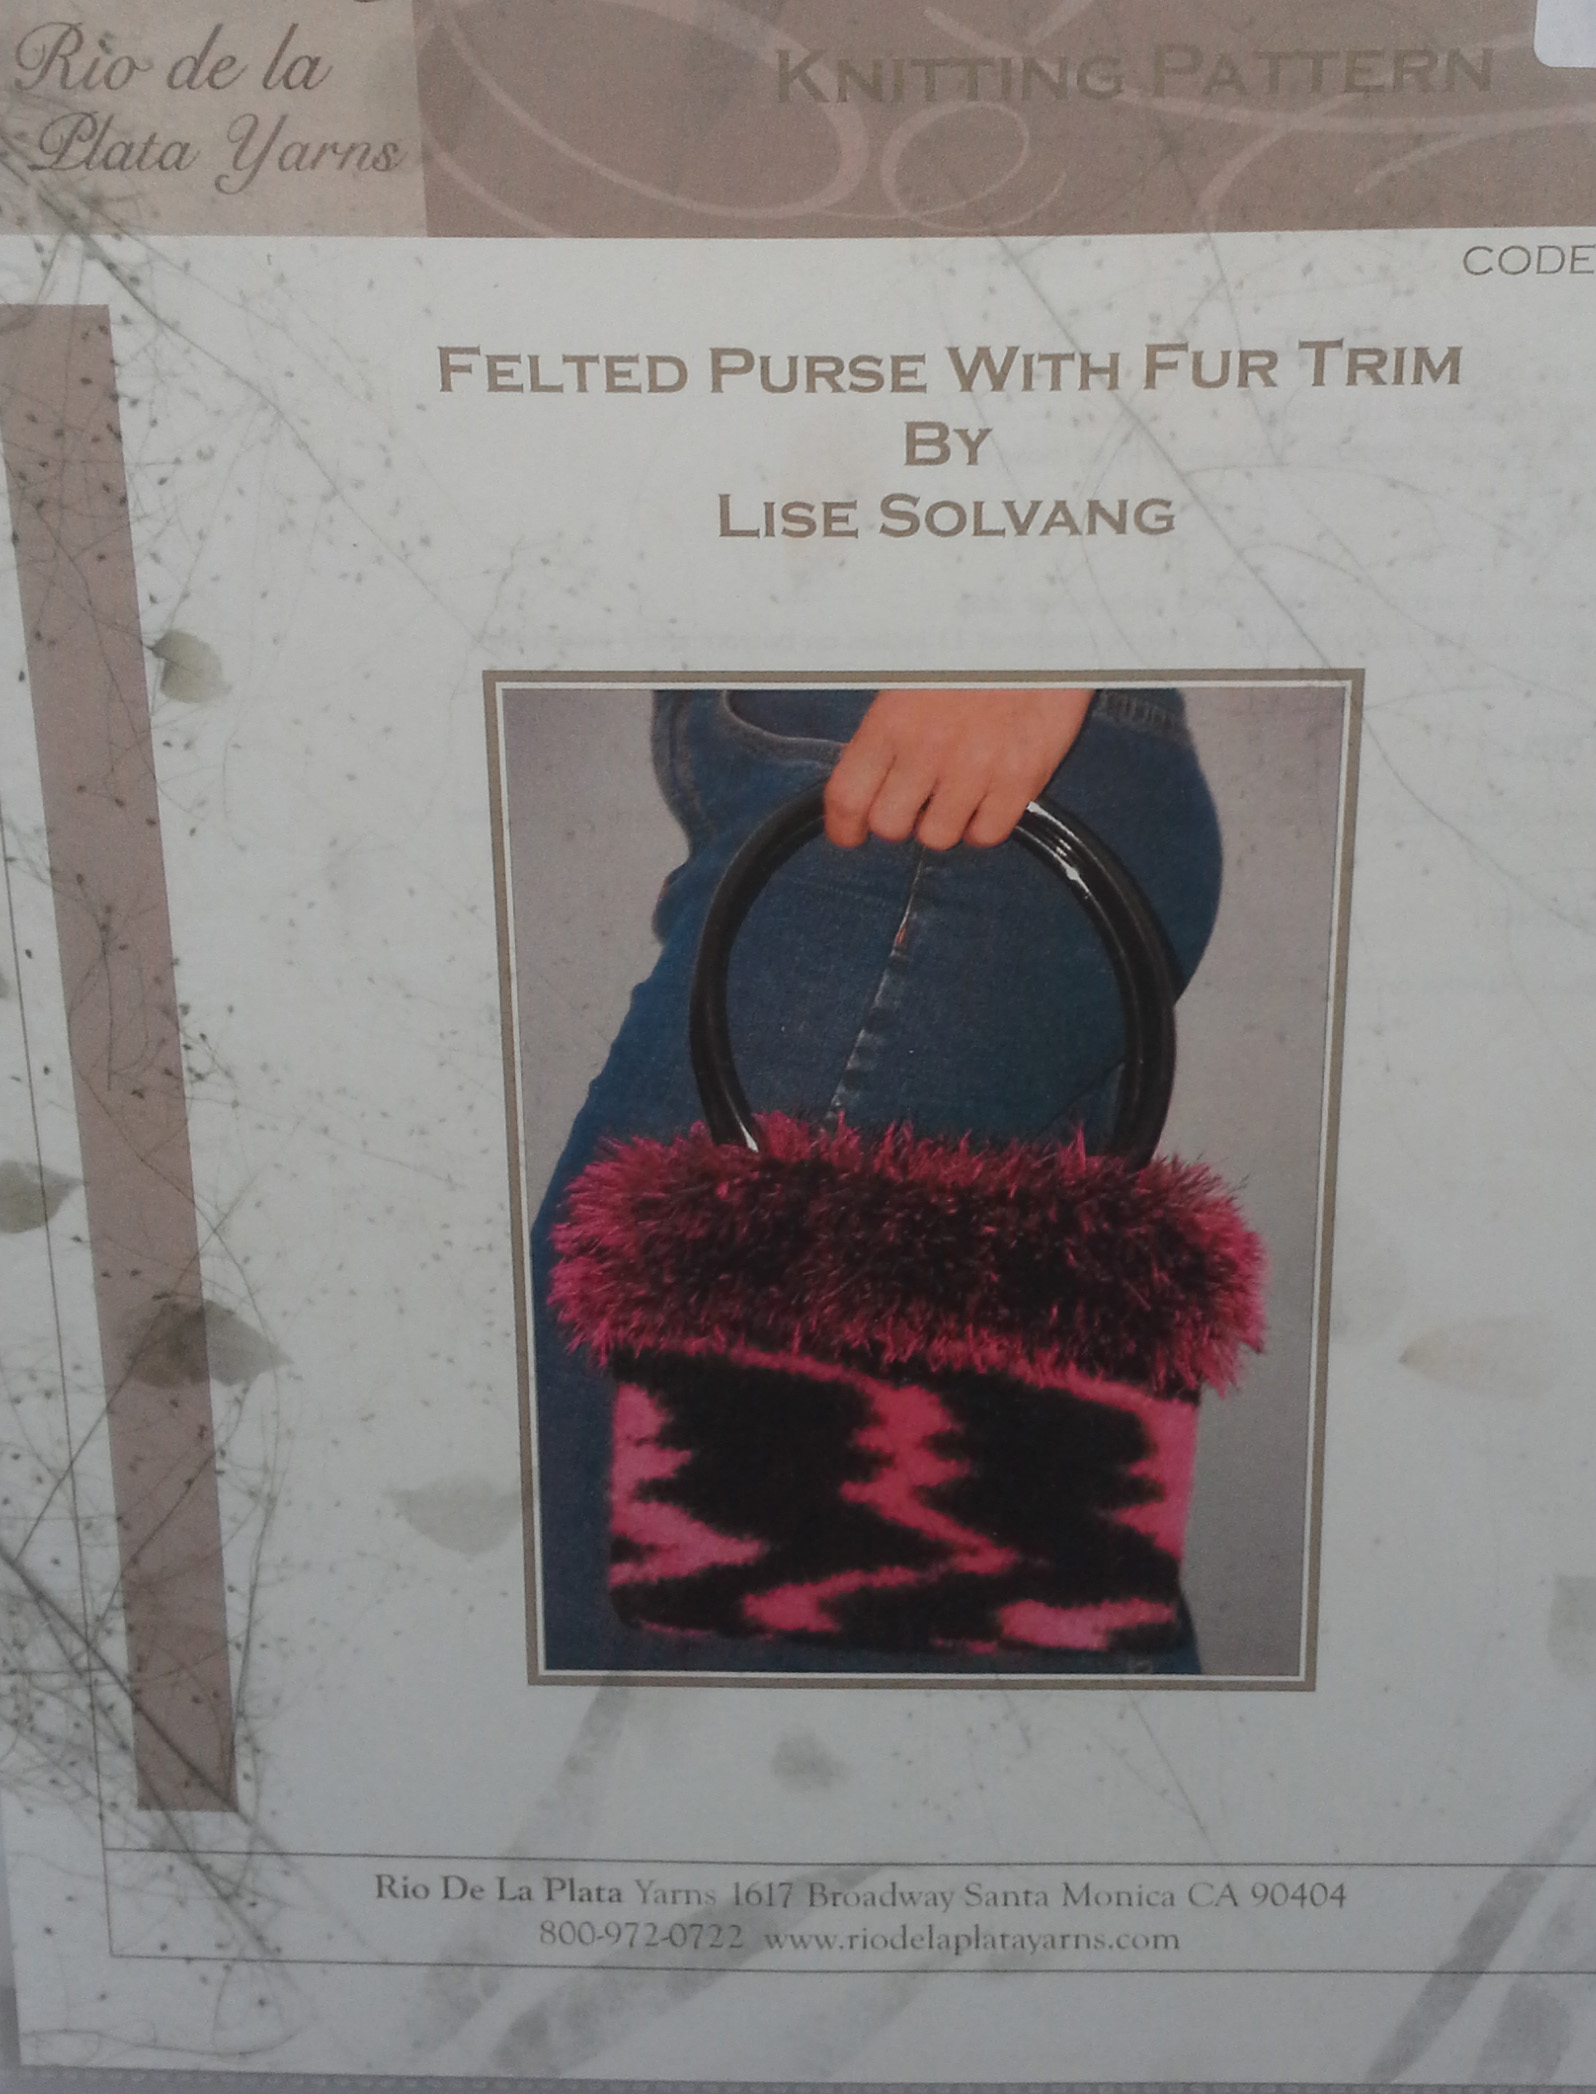 Felted Purse With Fur Trim